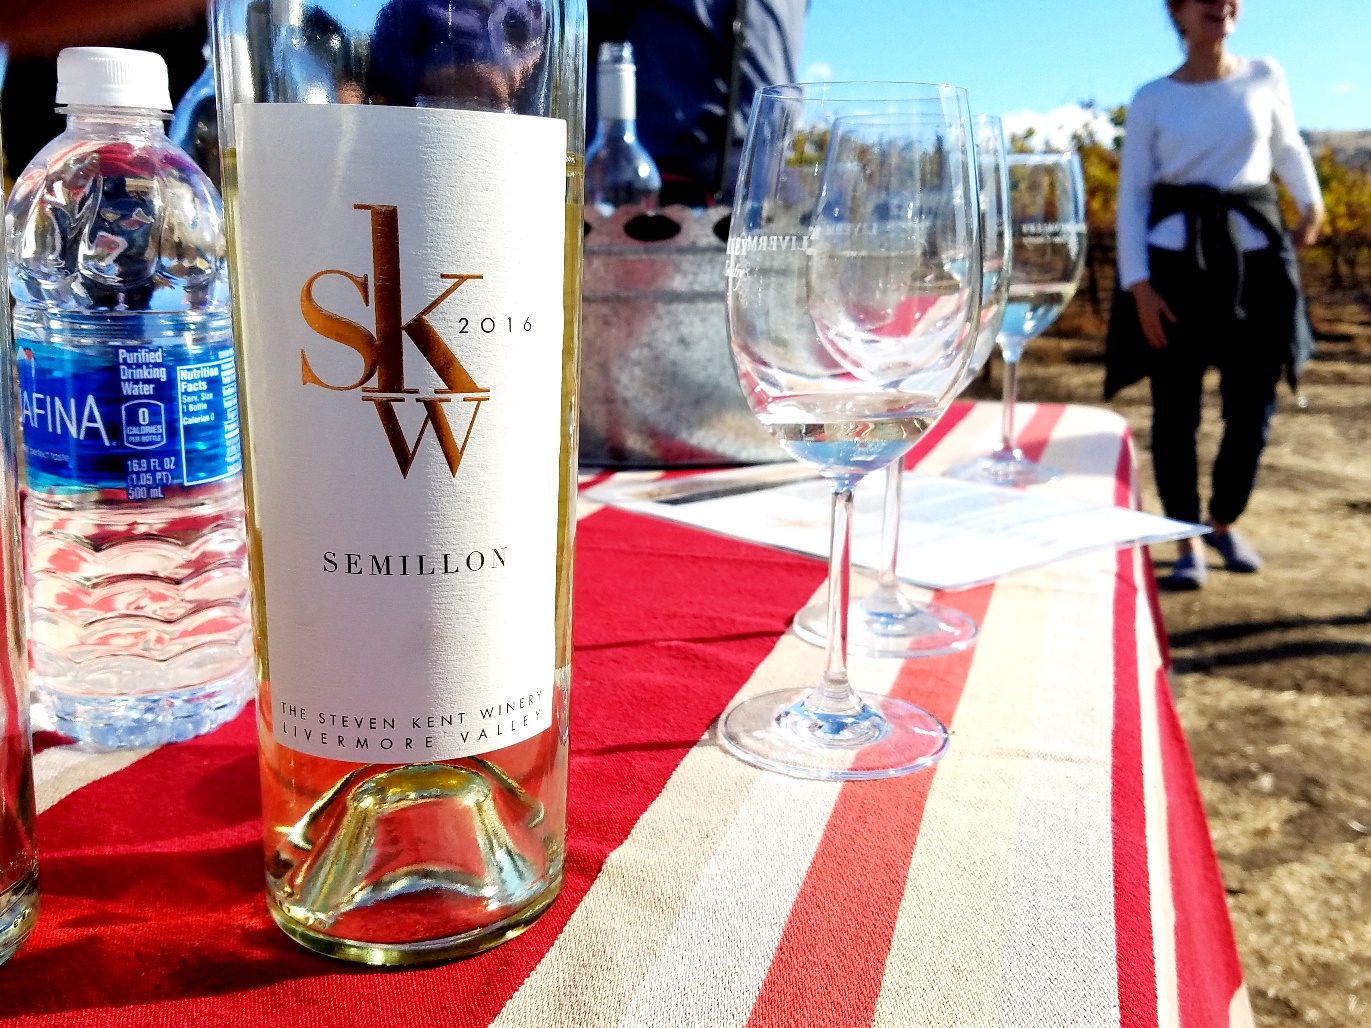 The Steven Kent Winery, SKW Semillon 2016, Livermore Valley, California, Wine Casual